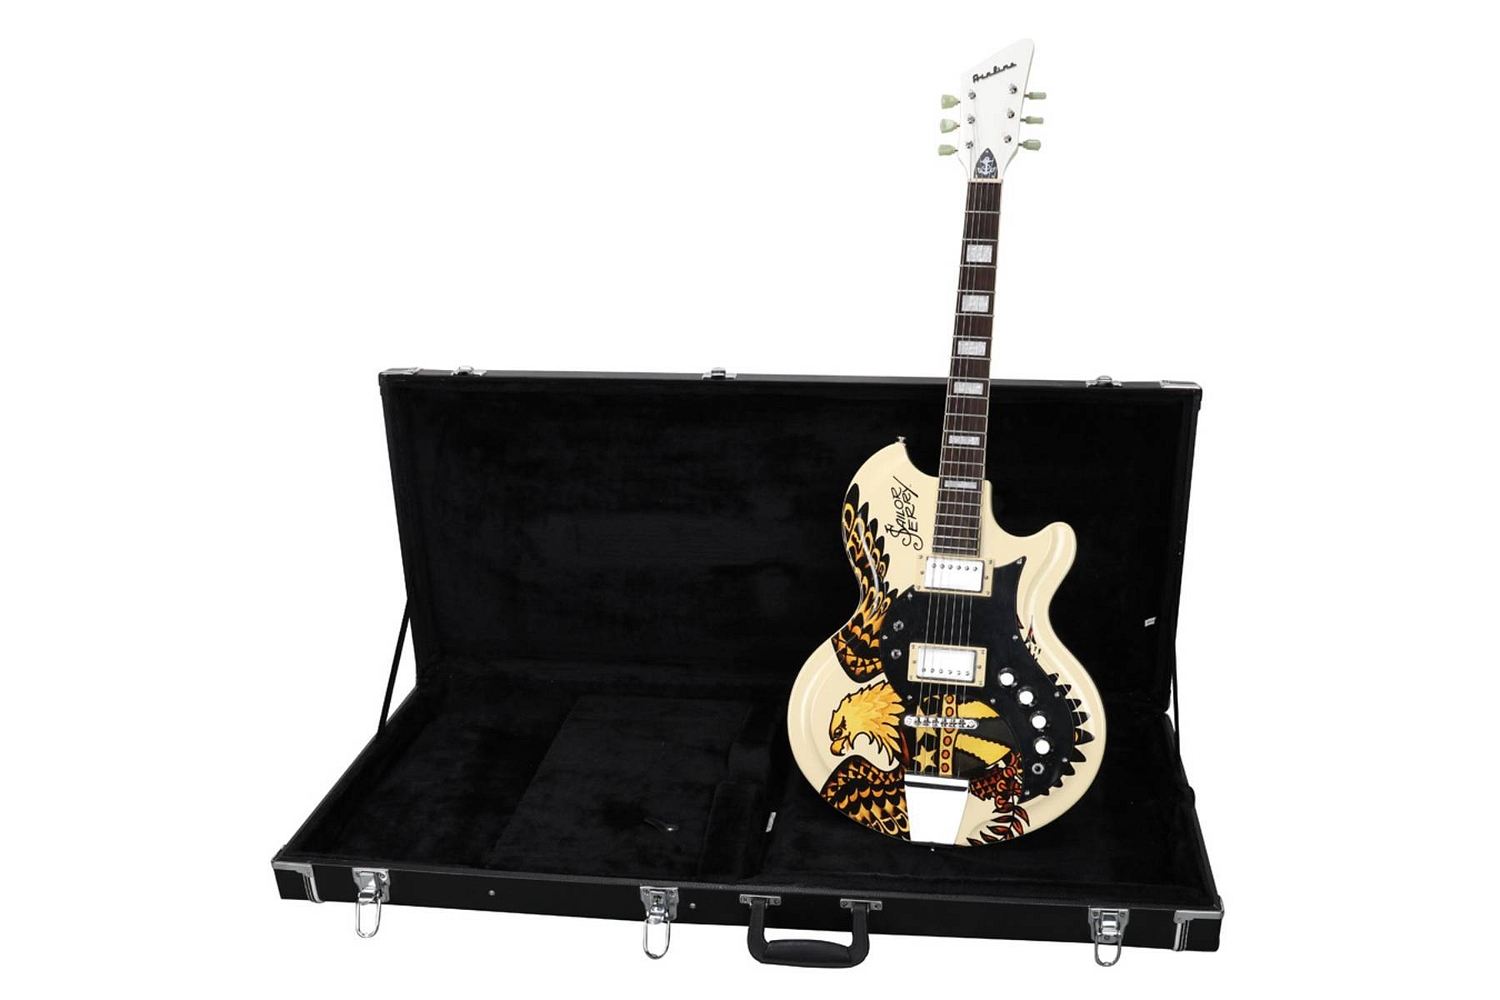 Sailor Jerry donate special edition guitar to auction raising money for hospitality